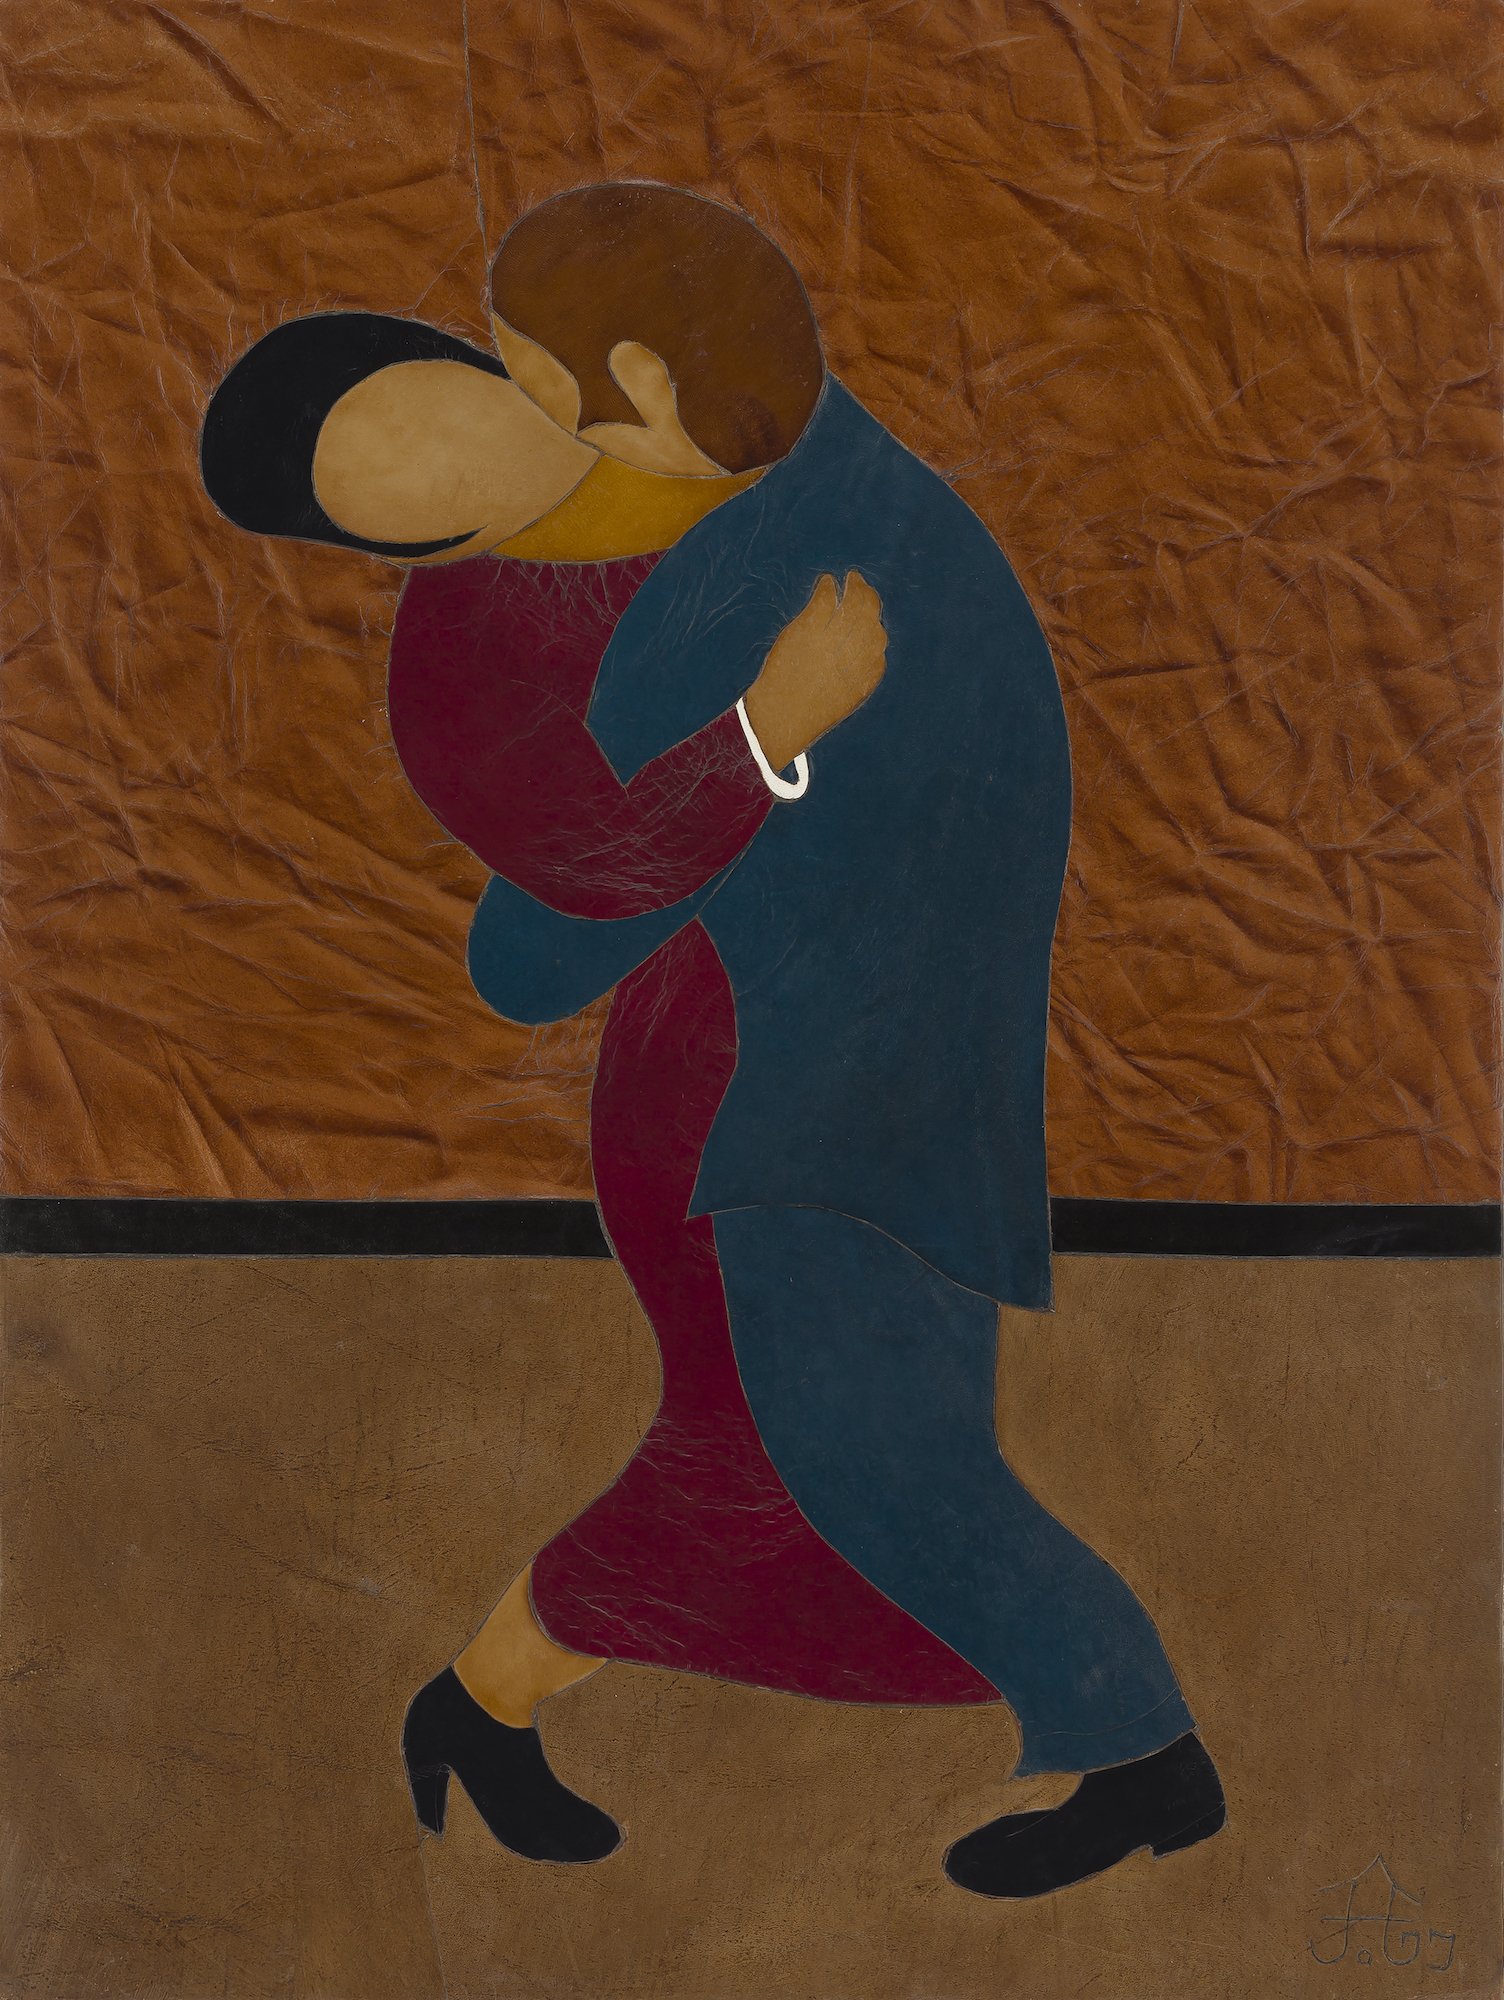 Two figures dancing closely in red, blue, and brown.